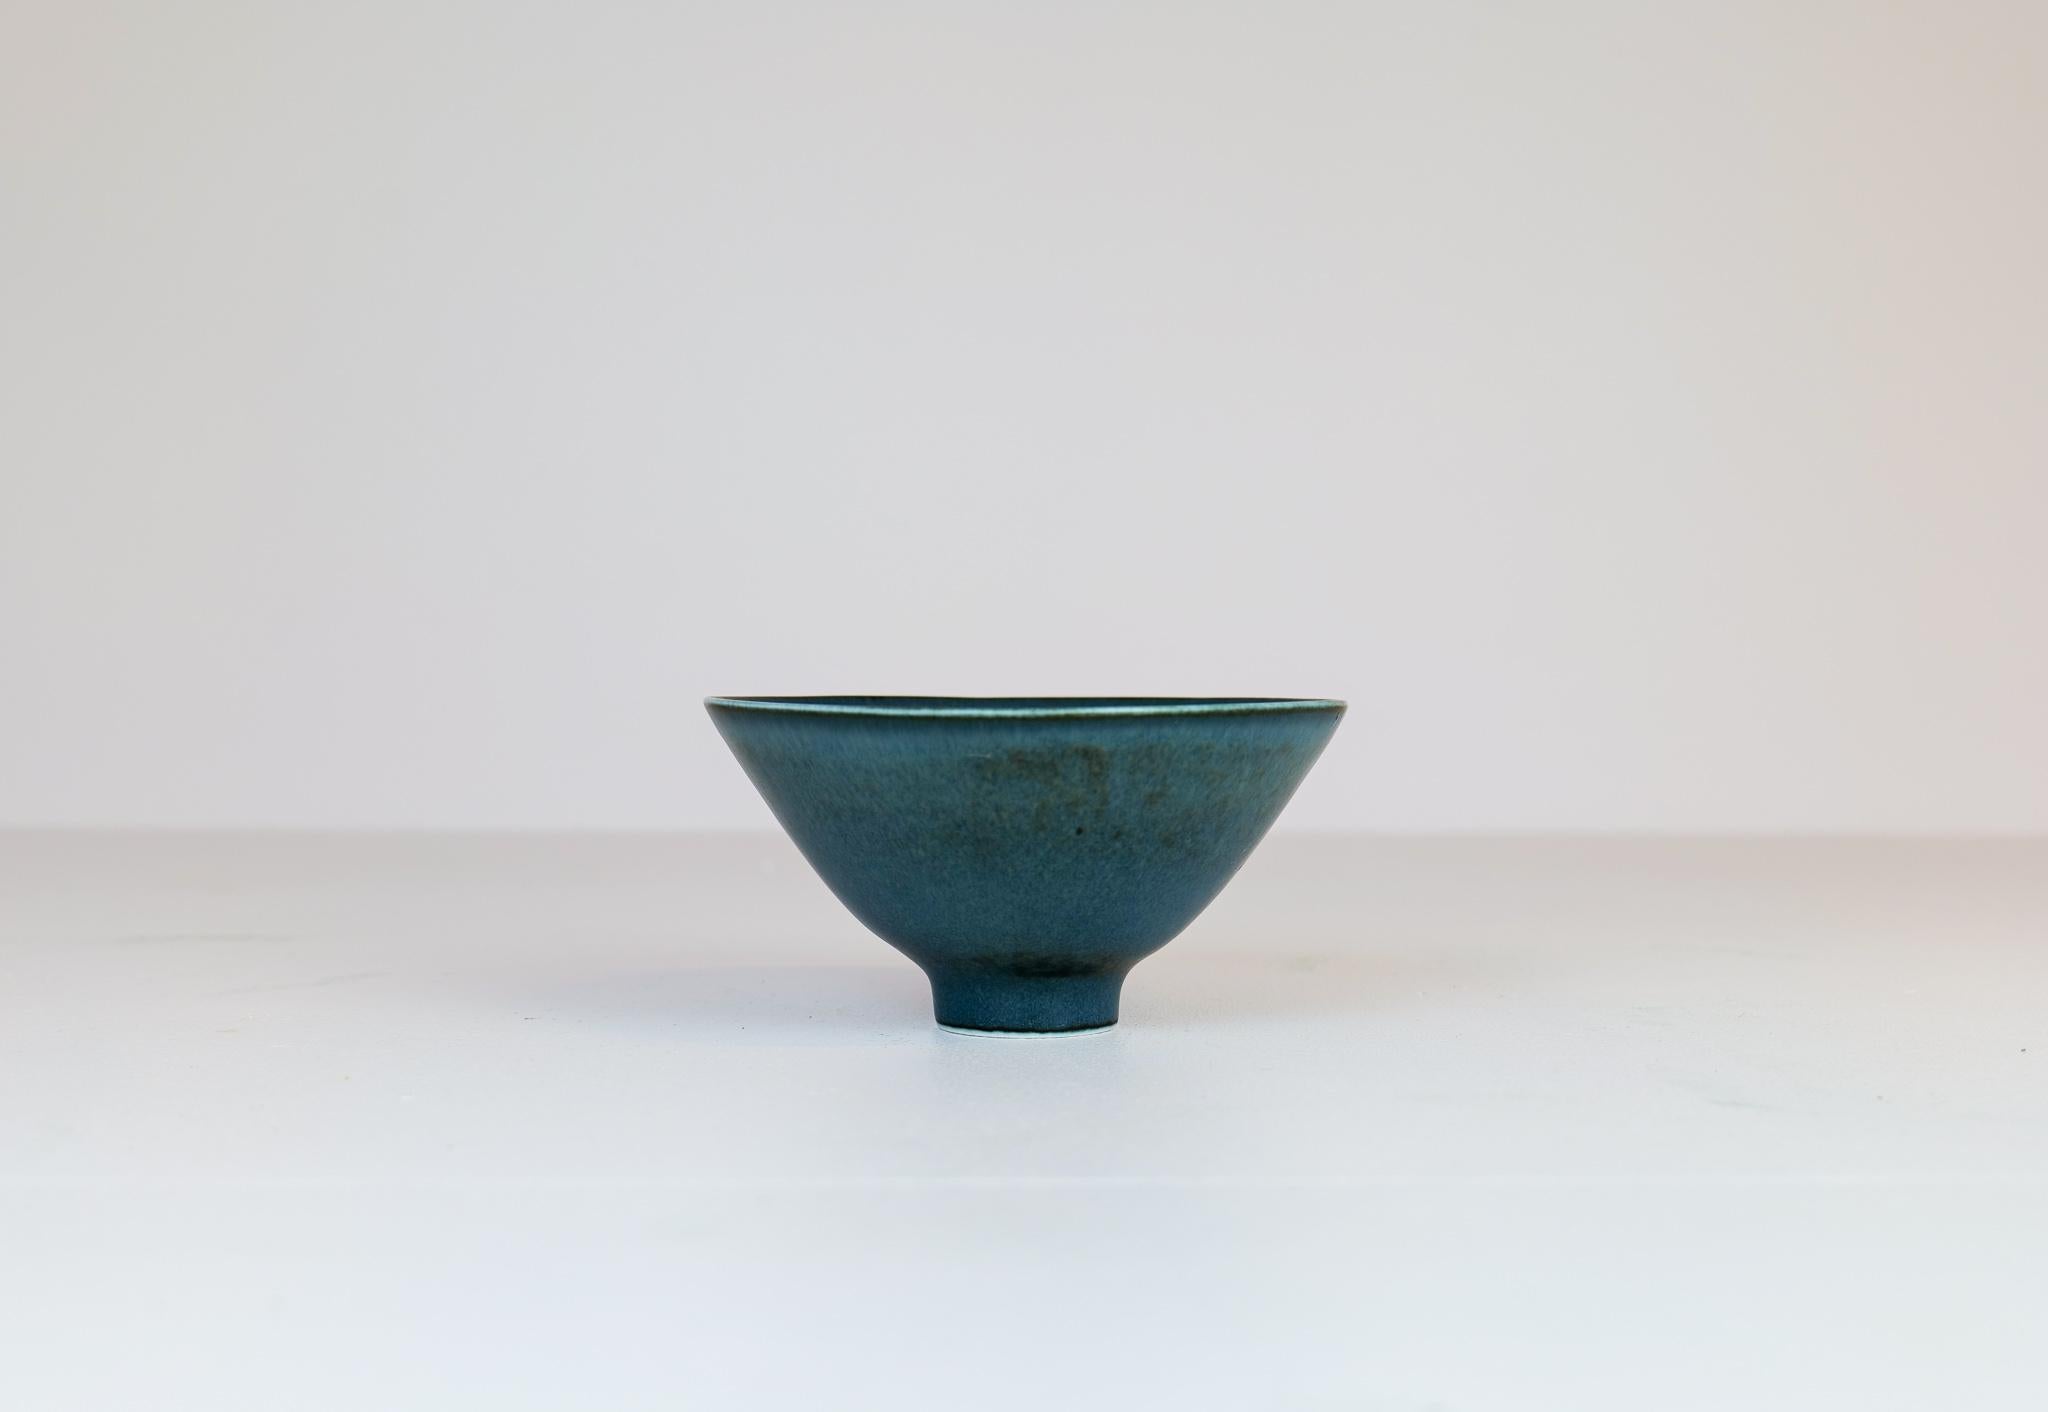 Wonderful bowl on a small foot. Manufactured in the 1950s at Rörstrand, designed by Carl Harry Stålhane.
The bowl has a wonderful glaze and it lifts the shape of the bowls to be wonderful objects. Signed with SHX.

Good condition

Dimensions: H